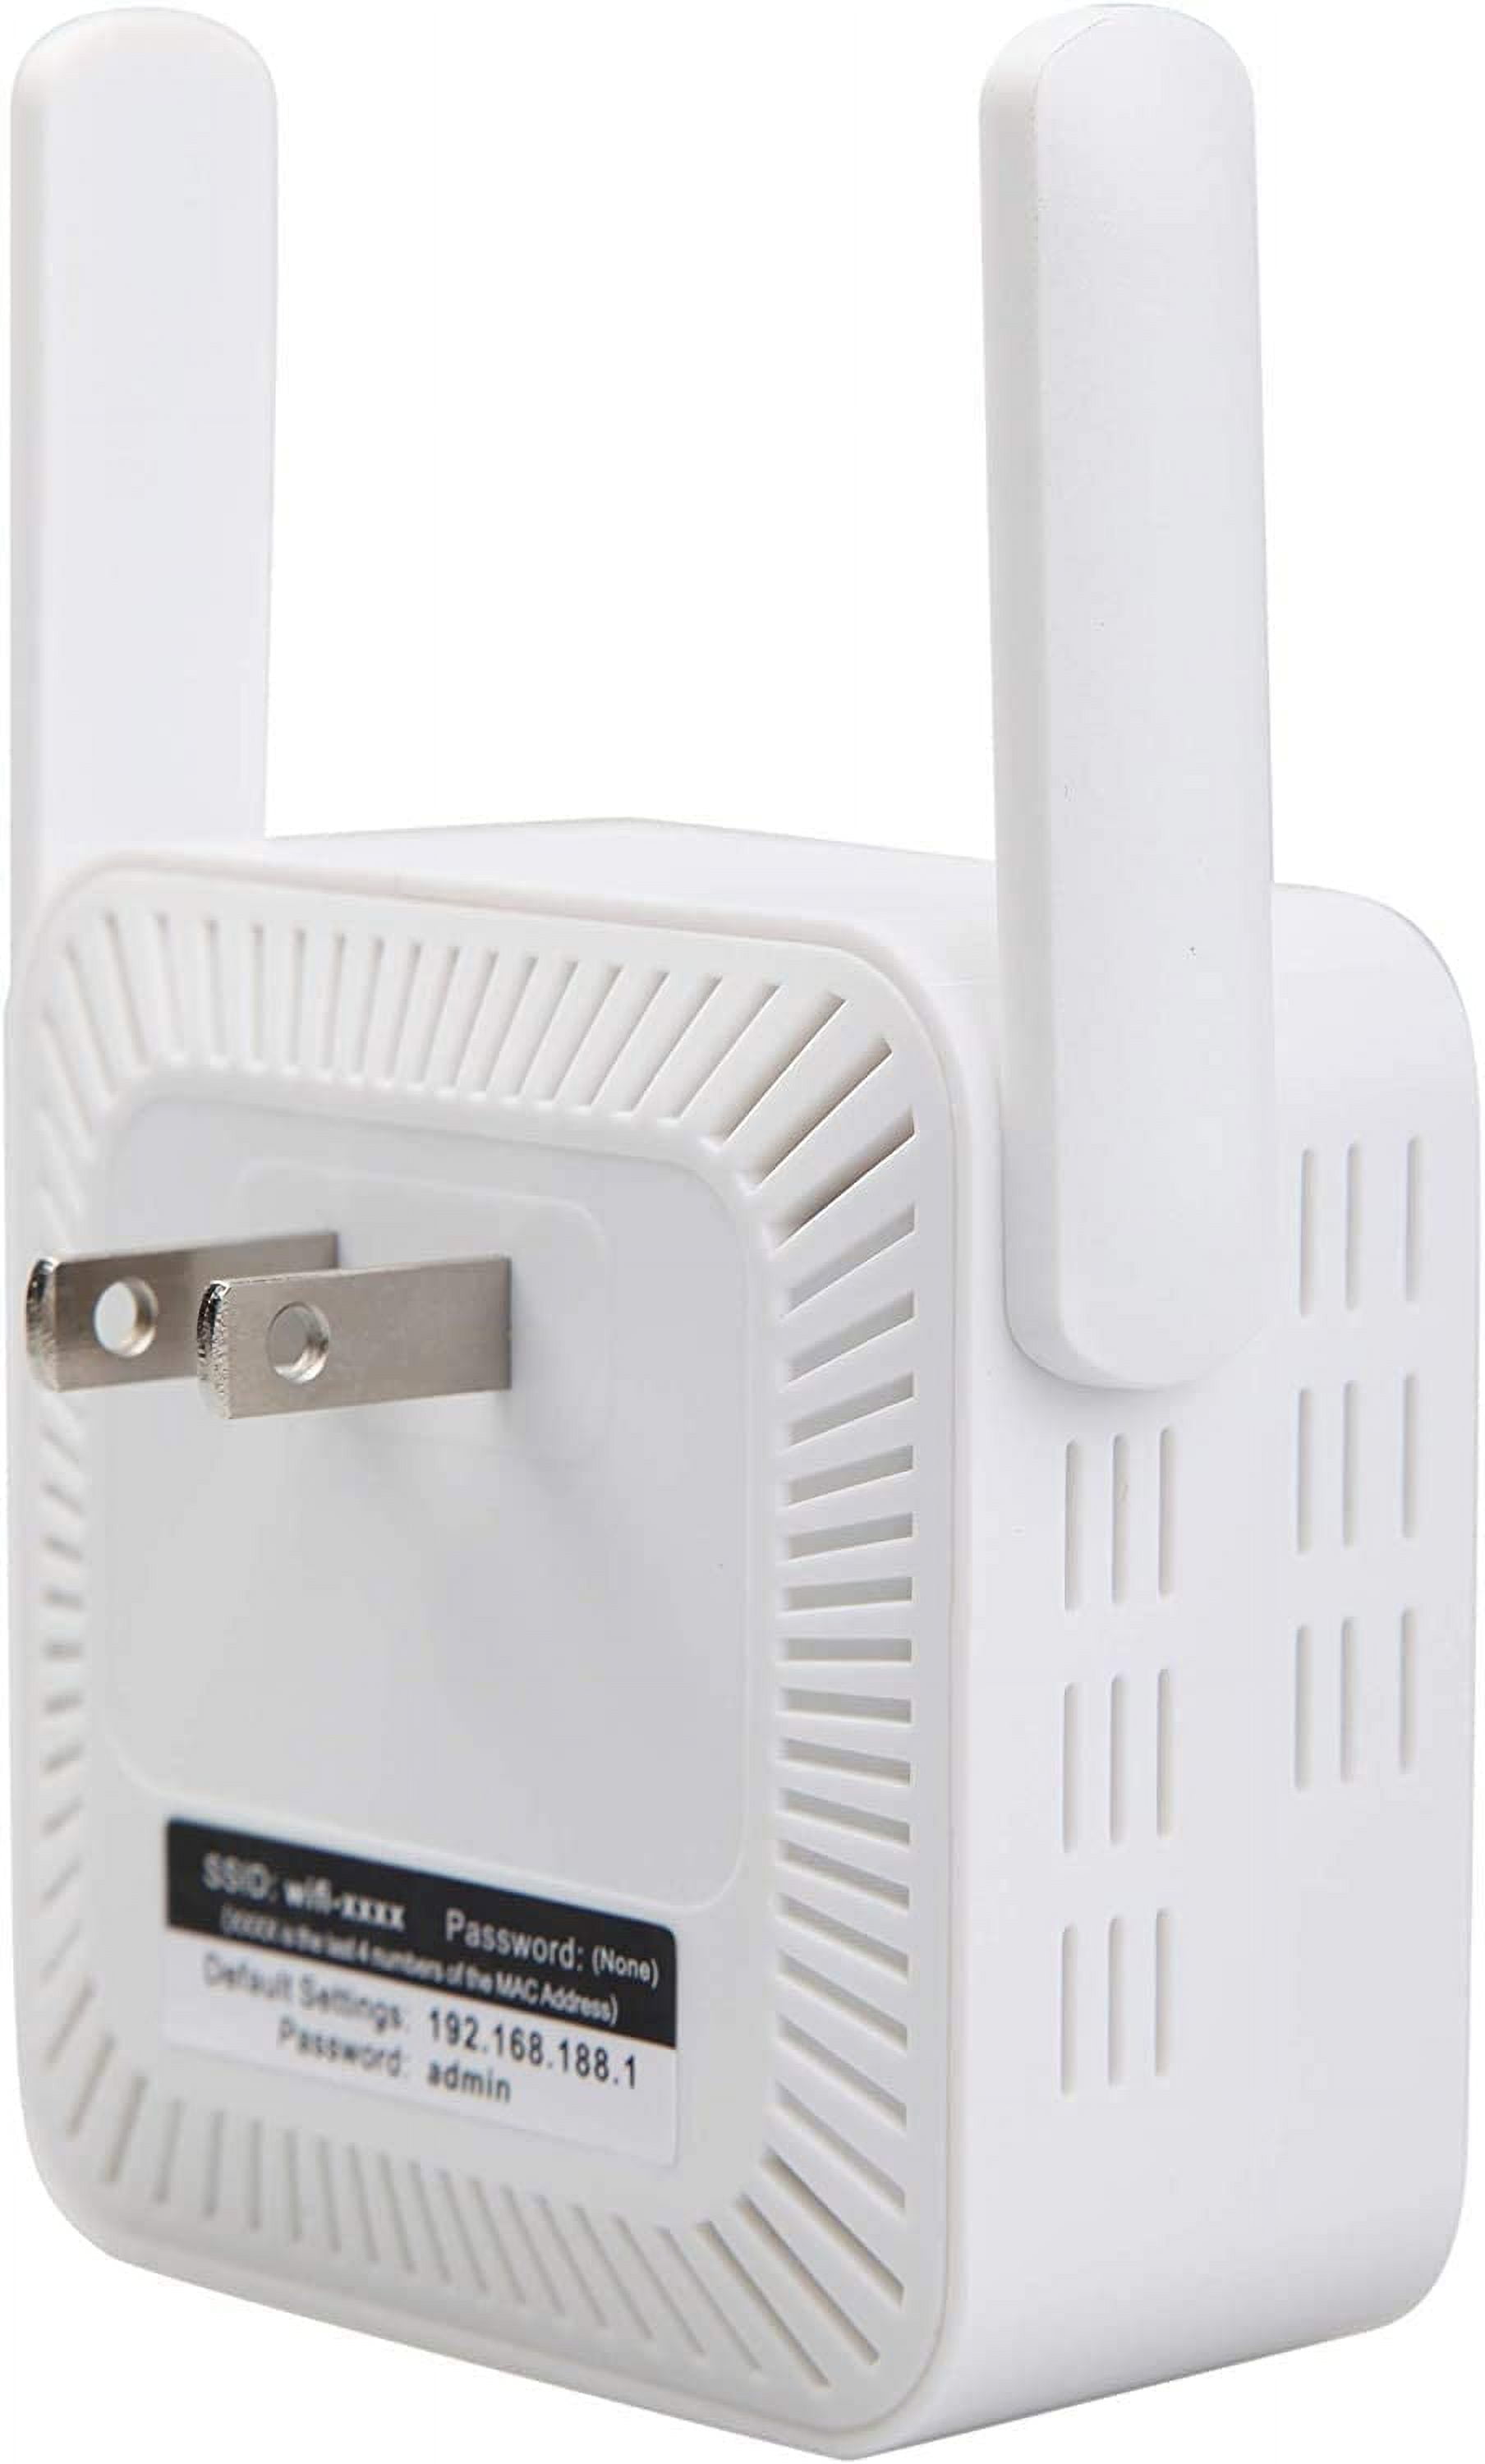 BES-30084 - Networking - beselettronica - Ripetitore wifi 2,4GHz